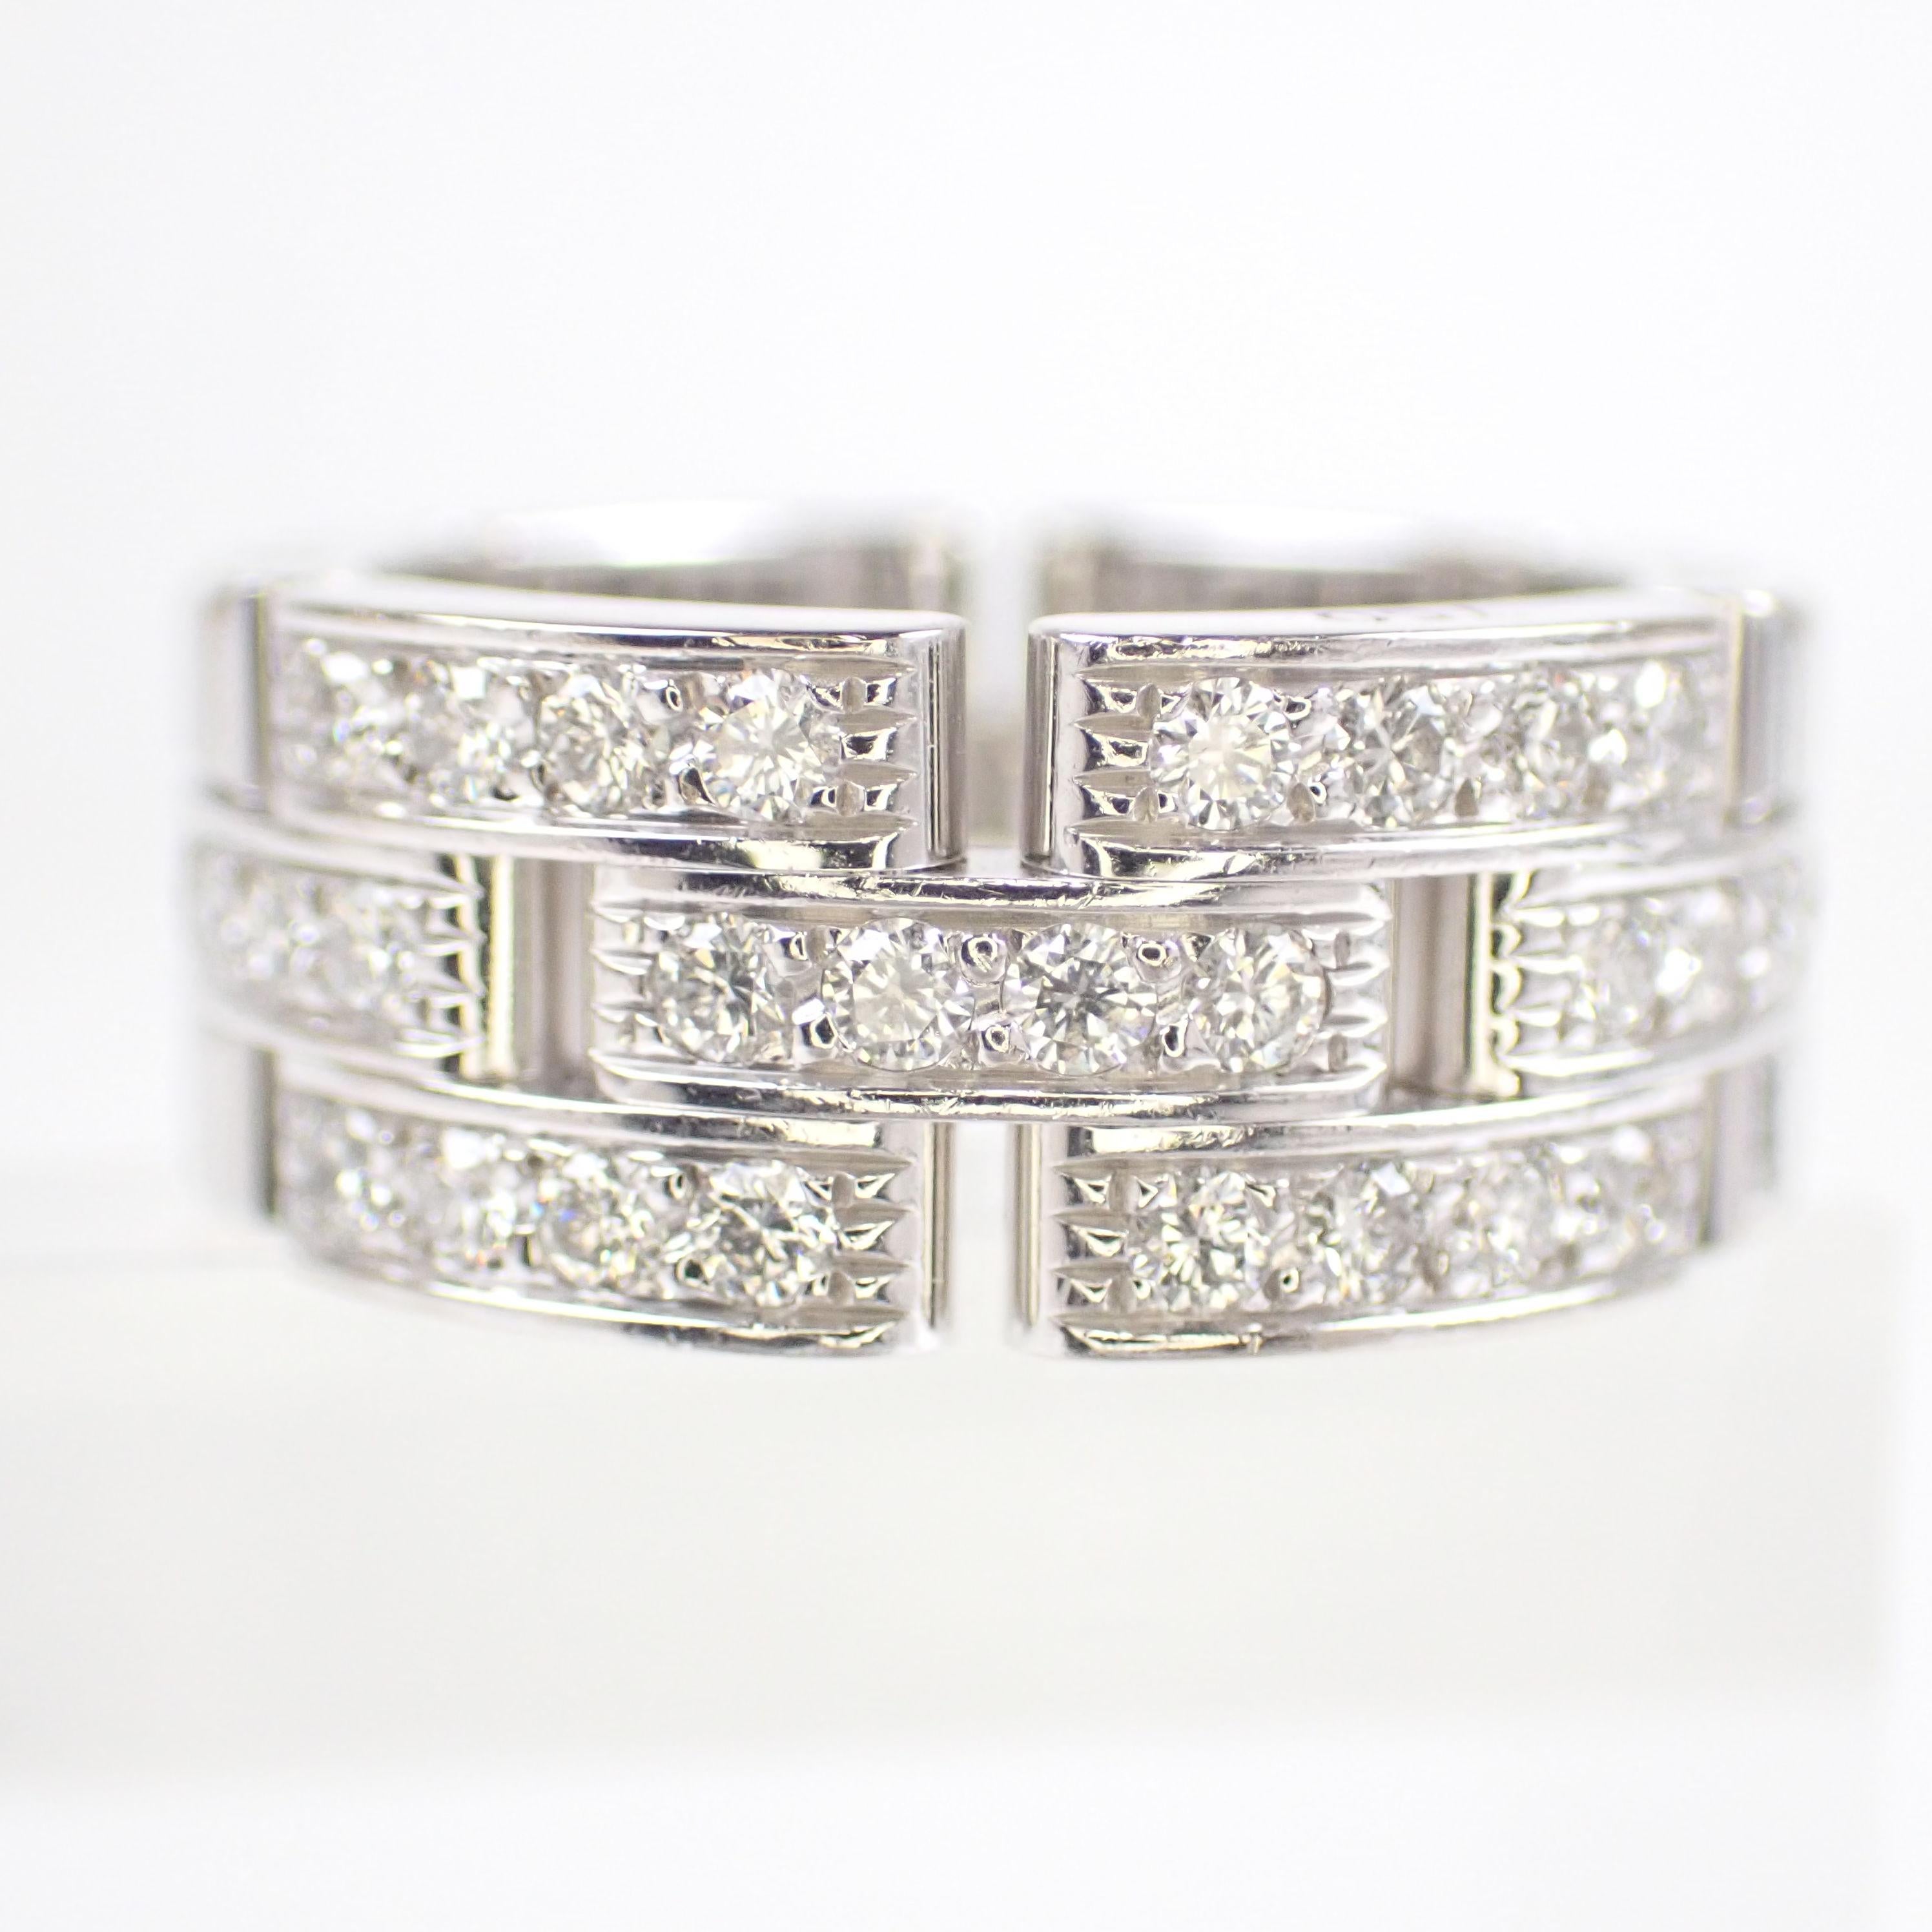 Brand : Cartier
Description: Maillon Panthère Ring 
Metal Type: 750WG/ White Gold
Total Weight: 12.9g 
Size: 50
Width: 8mm
Condition: Preowned; small signs of wearing
Box -  Included
Papers -  Included
